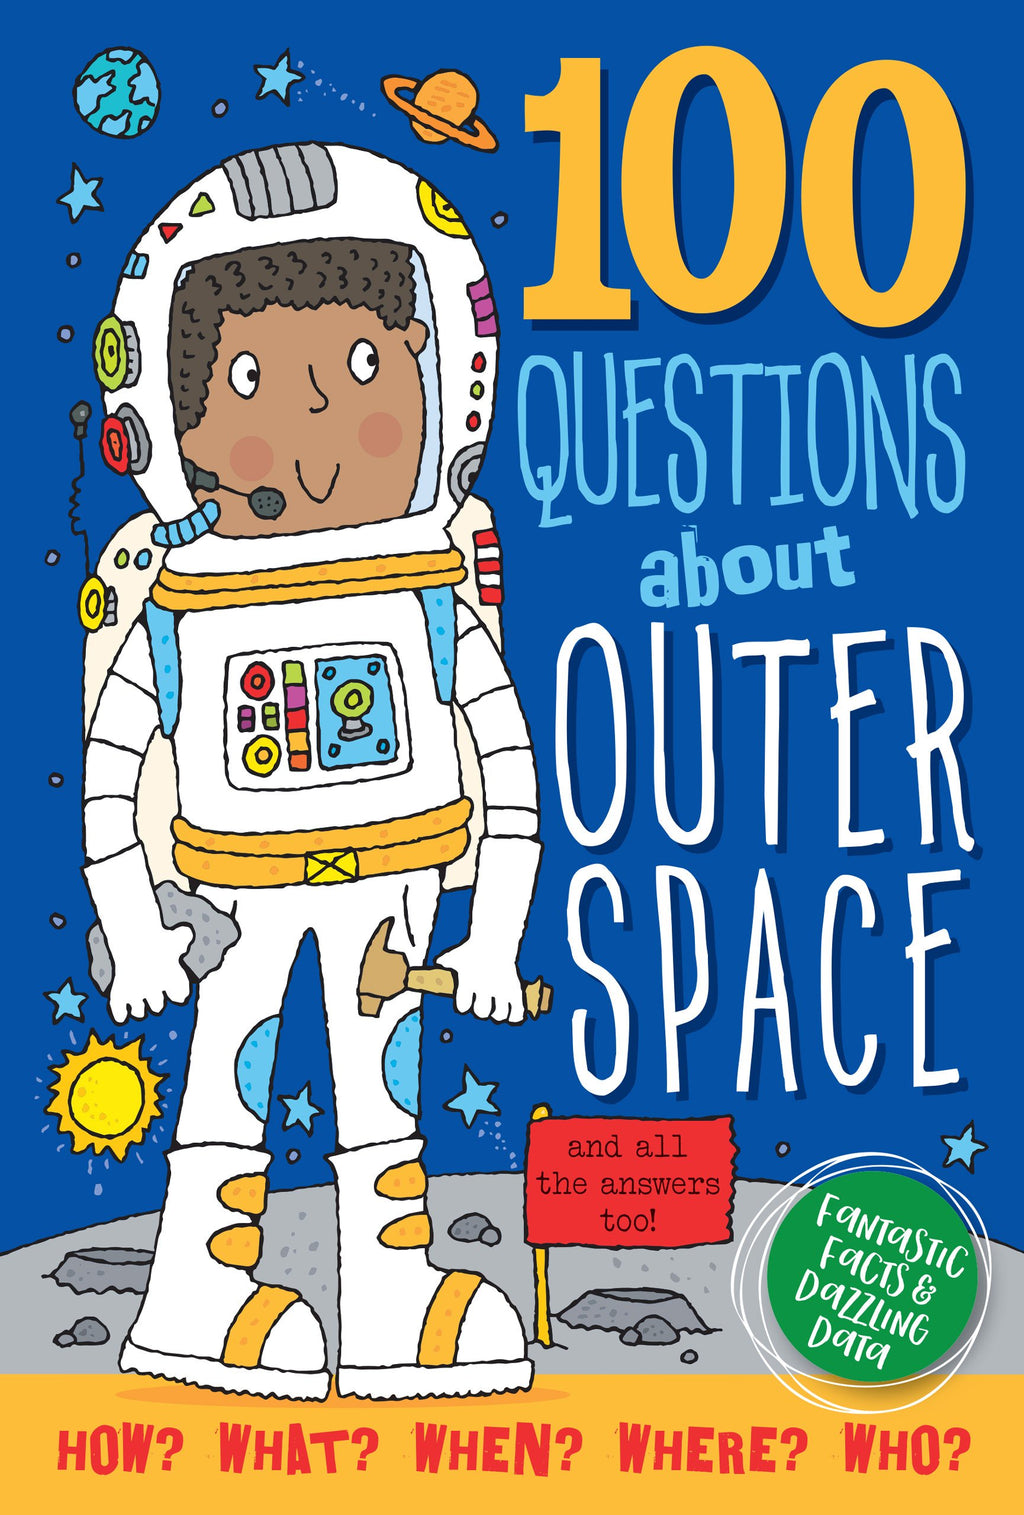 Peter Pauper - 100 Questions About Outer Space